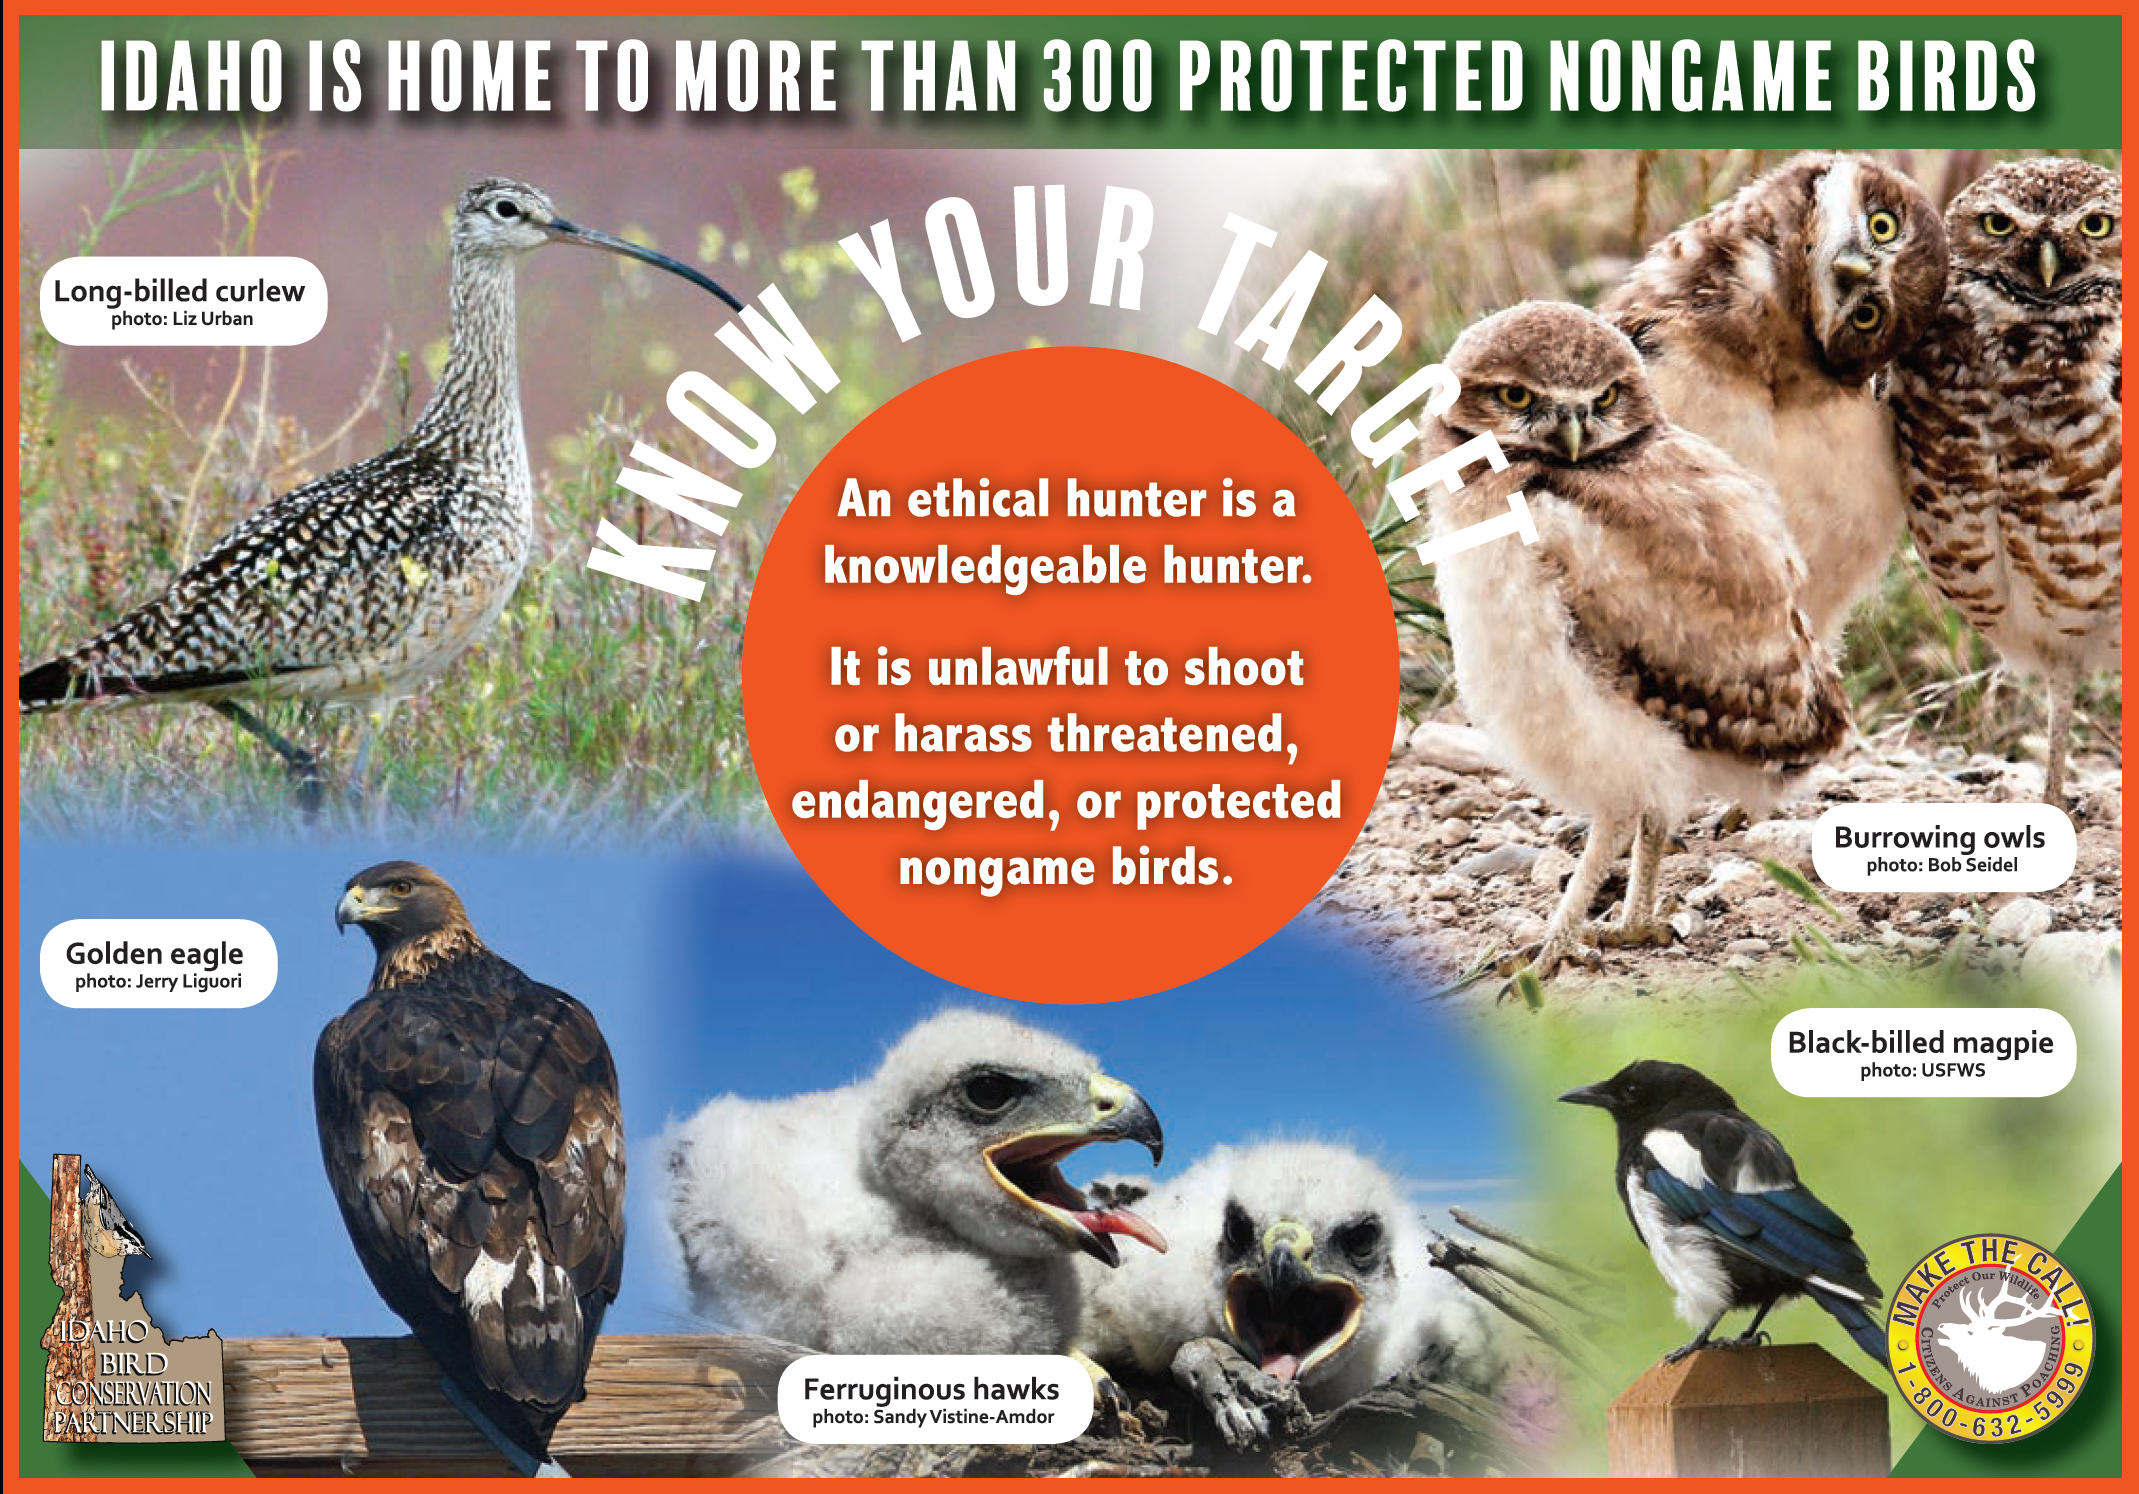 An advertisement that says Idaho is Home to 300 protected species. An ethical hunter is a knowledgeable hunter. Know your Target. It is illegal to threaten, harass, or shoot protected non-game birds. Species on the graphic include curlews, magpies, burrowing owls, and raptors